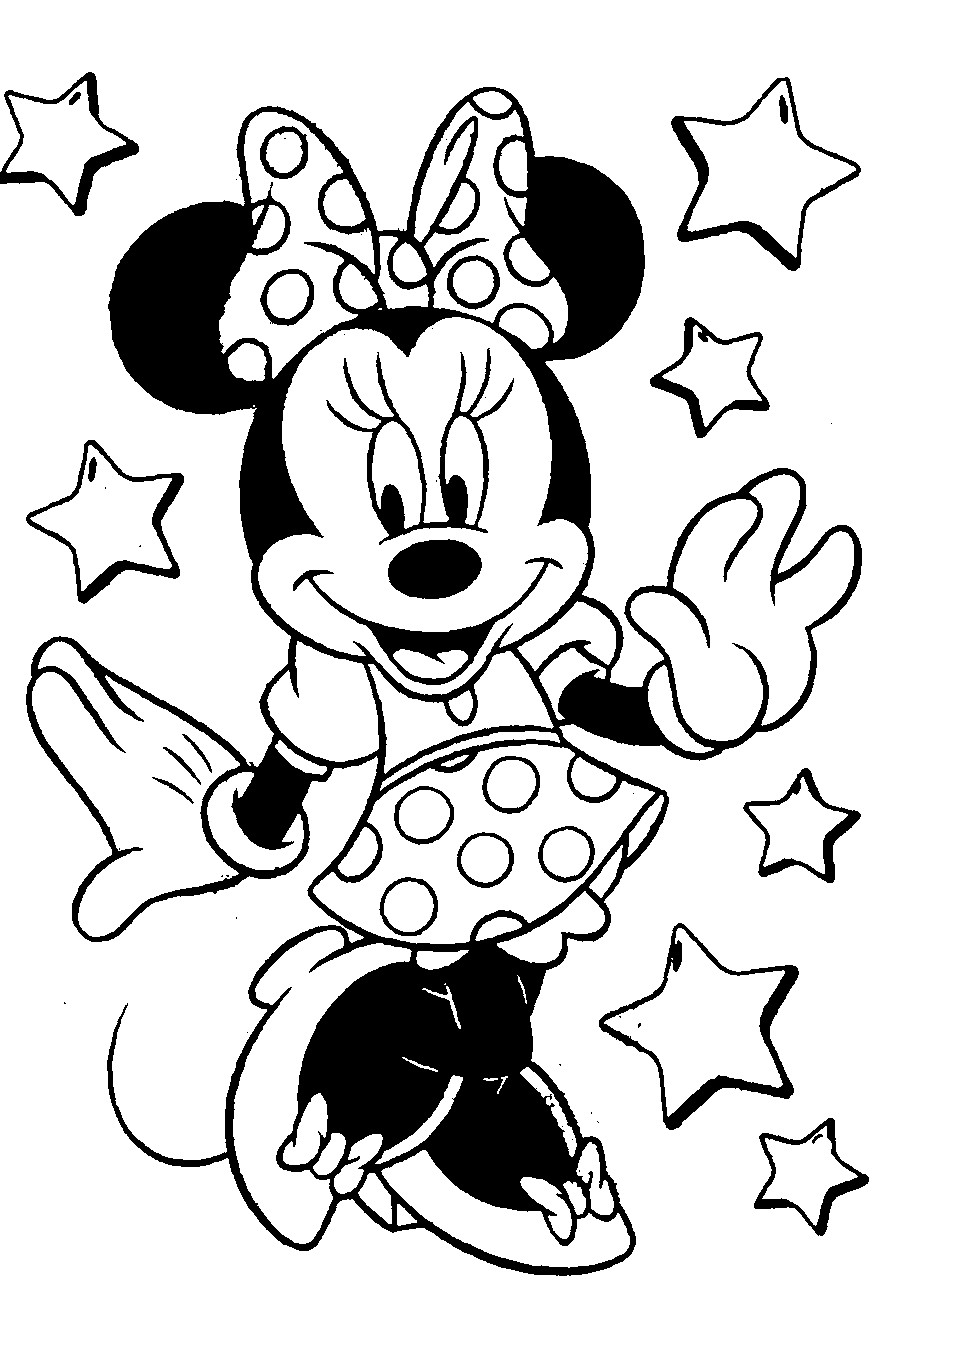 Mini Mouse Printable Coloring Pages
 DISNEY VALENTINE COLORNG PAGES WITH MICKEY AND MINNIE